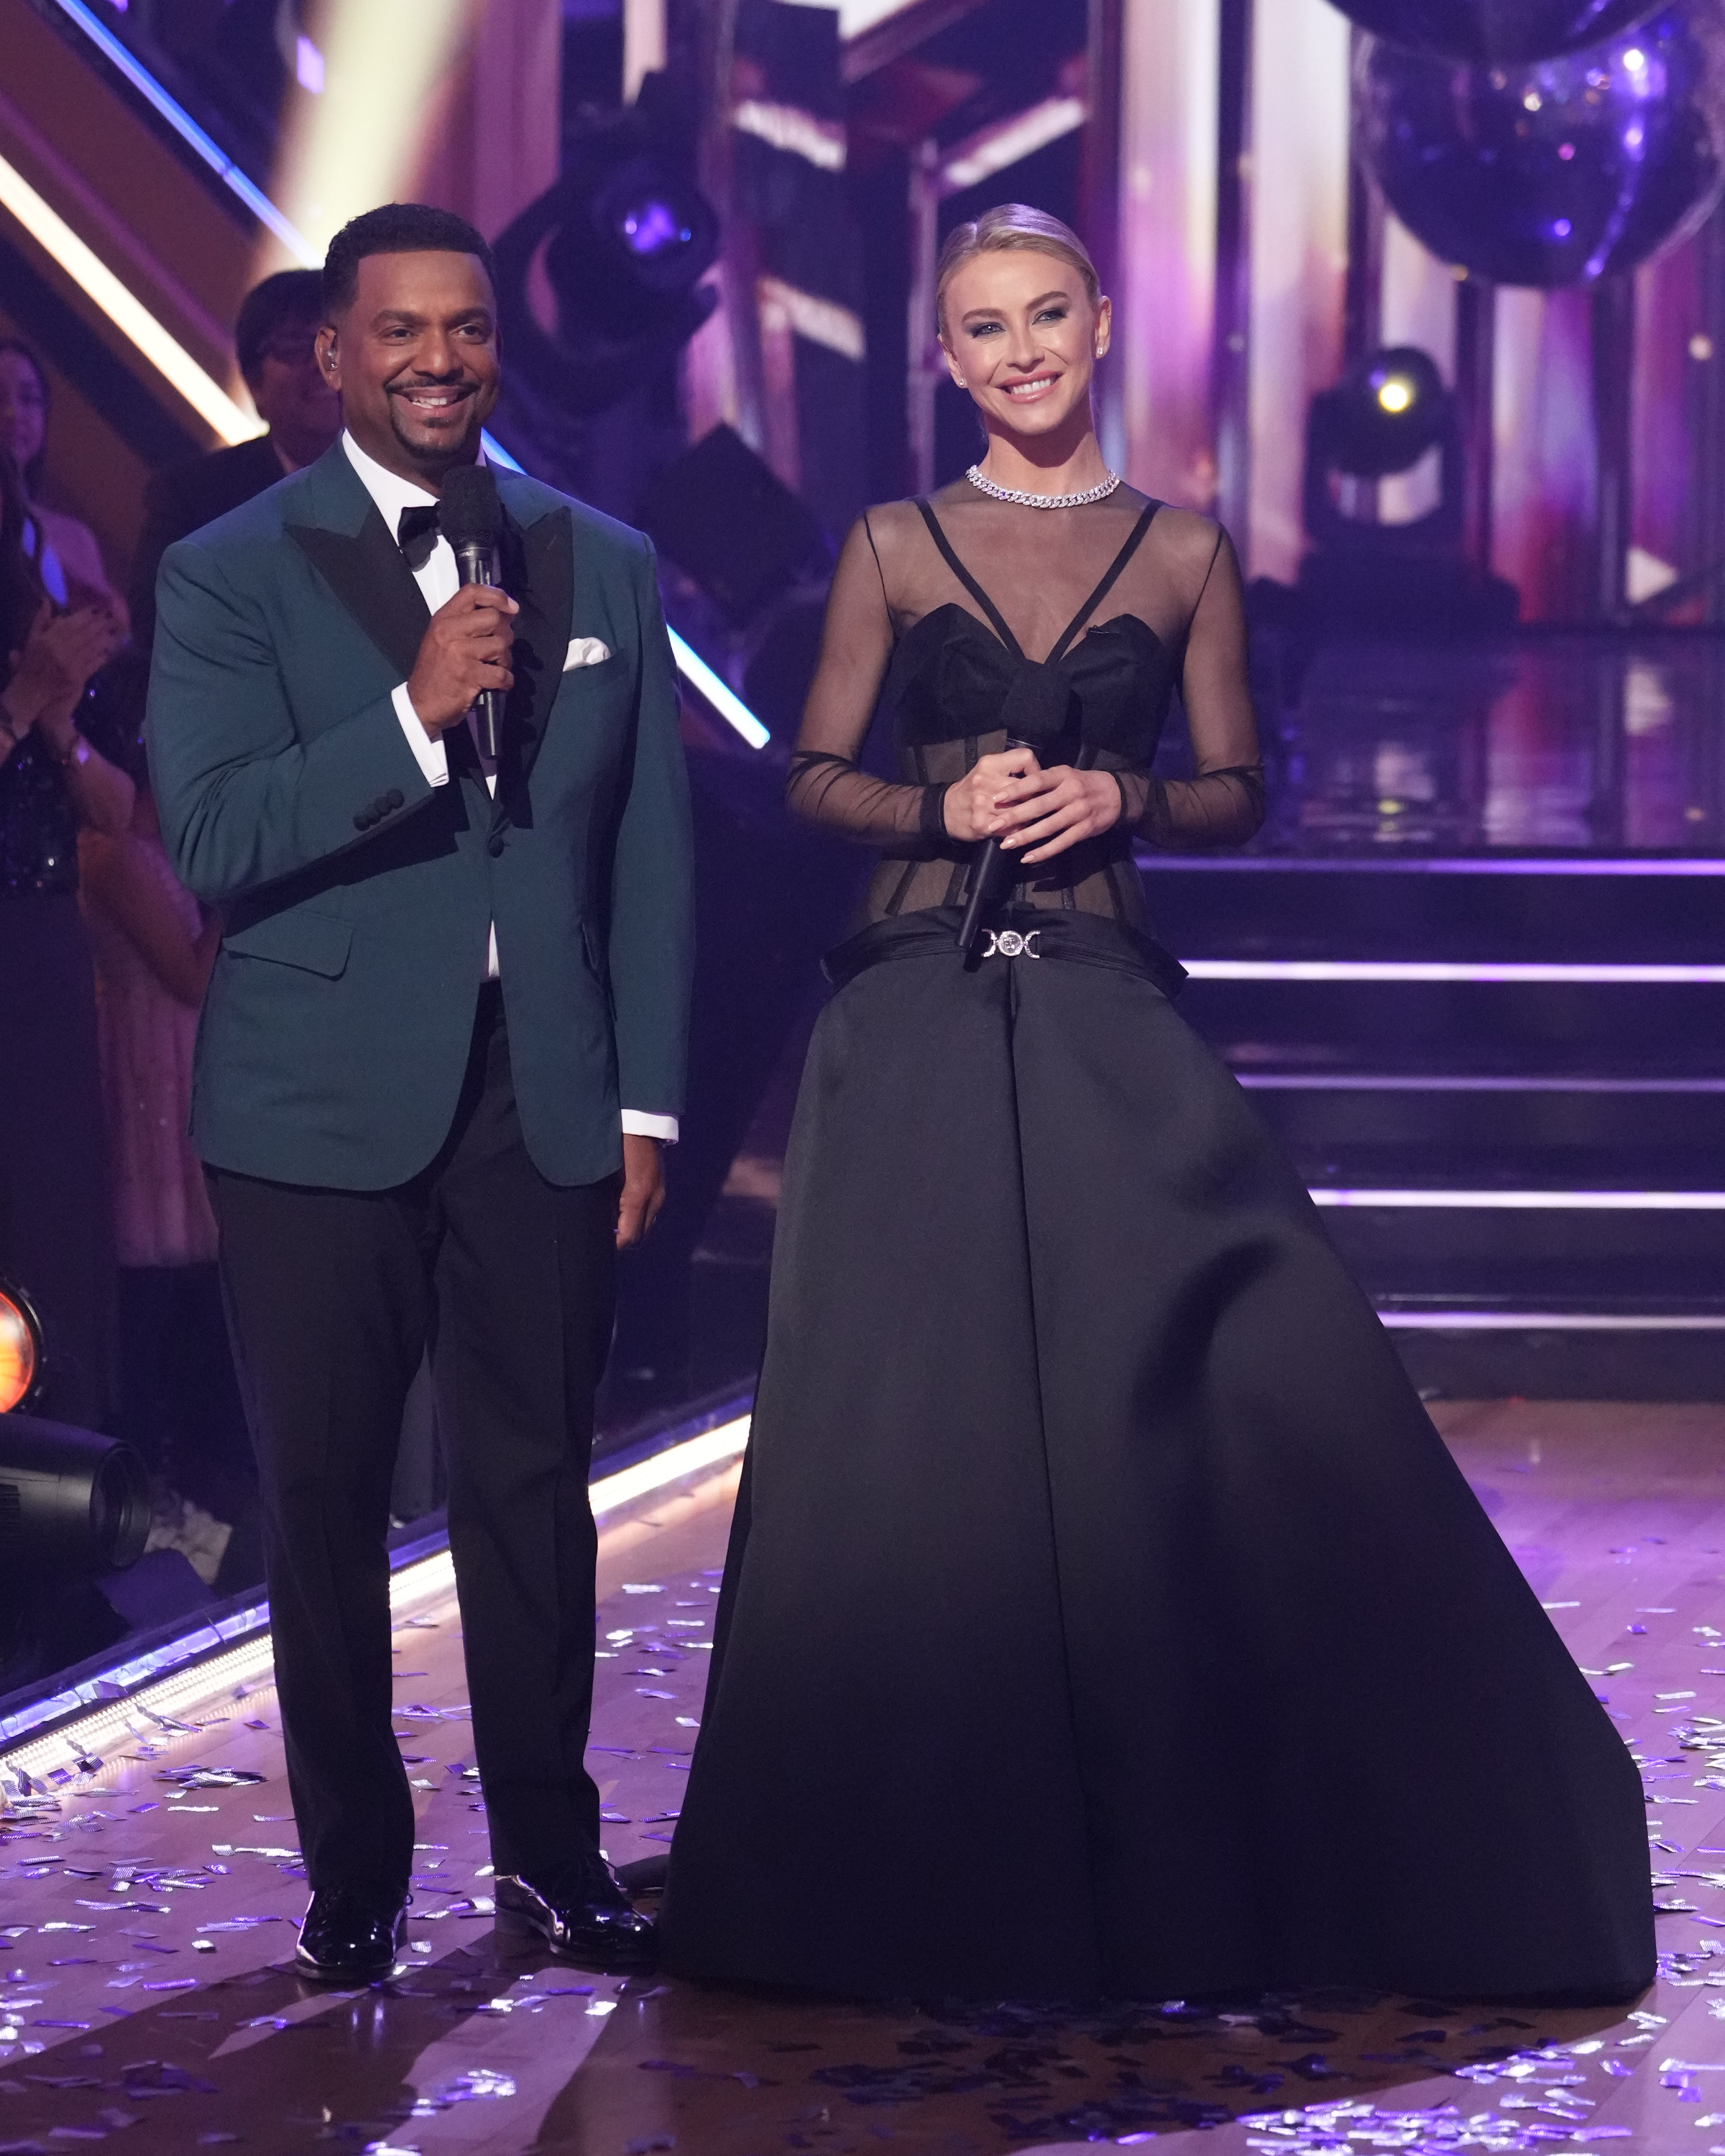 Julianne pictured with Alfonso Ribeiro on the set of Dancing With The Stars